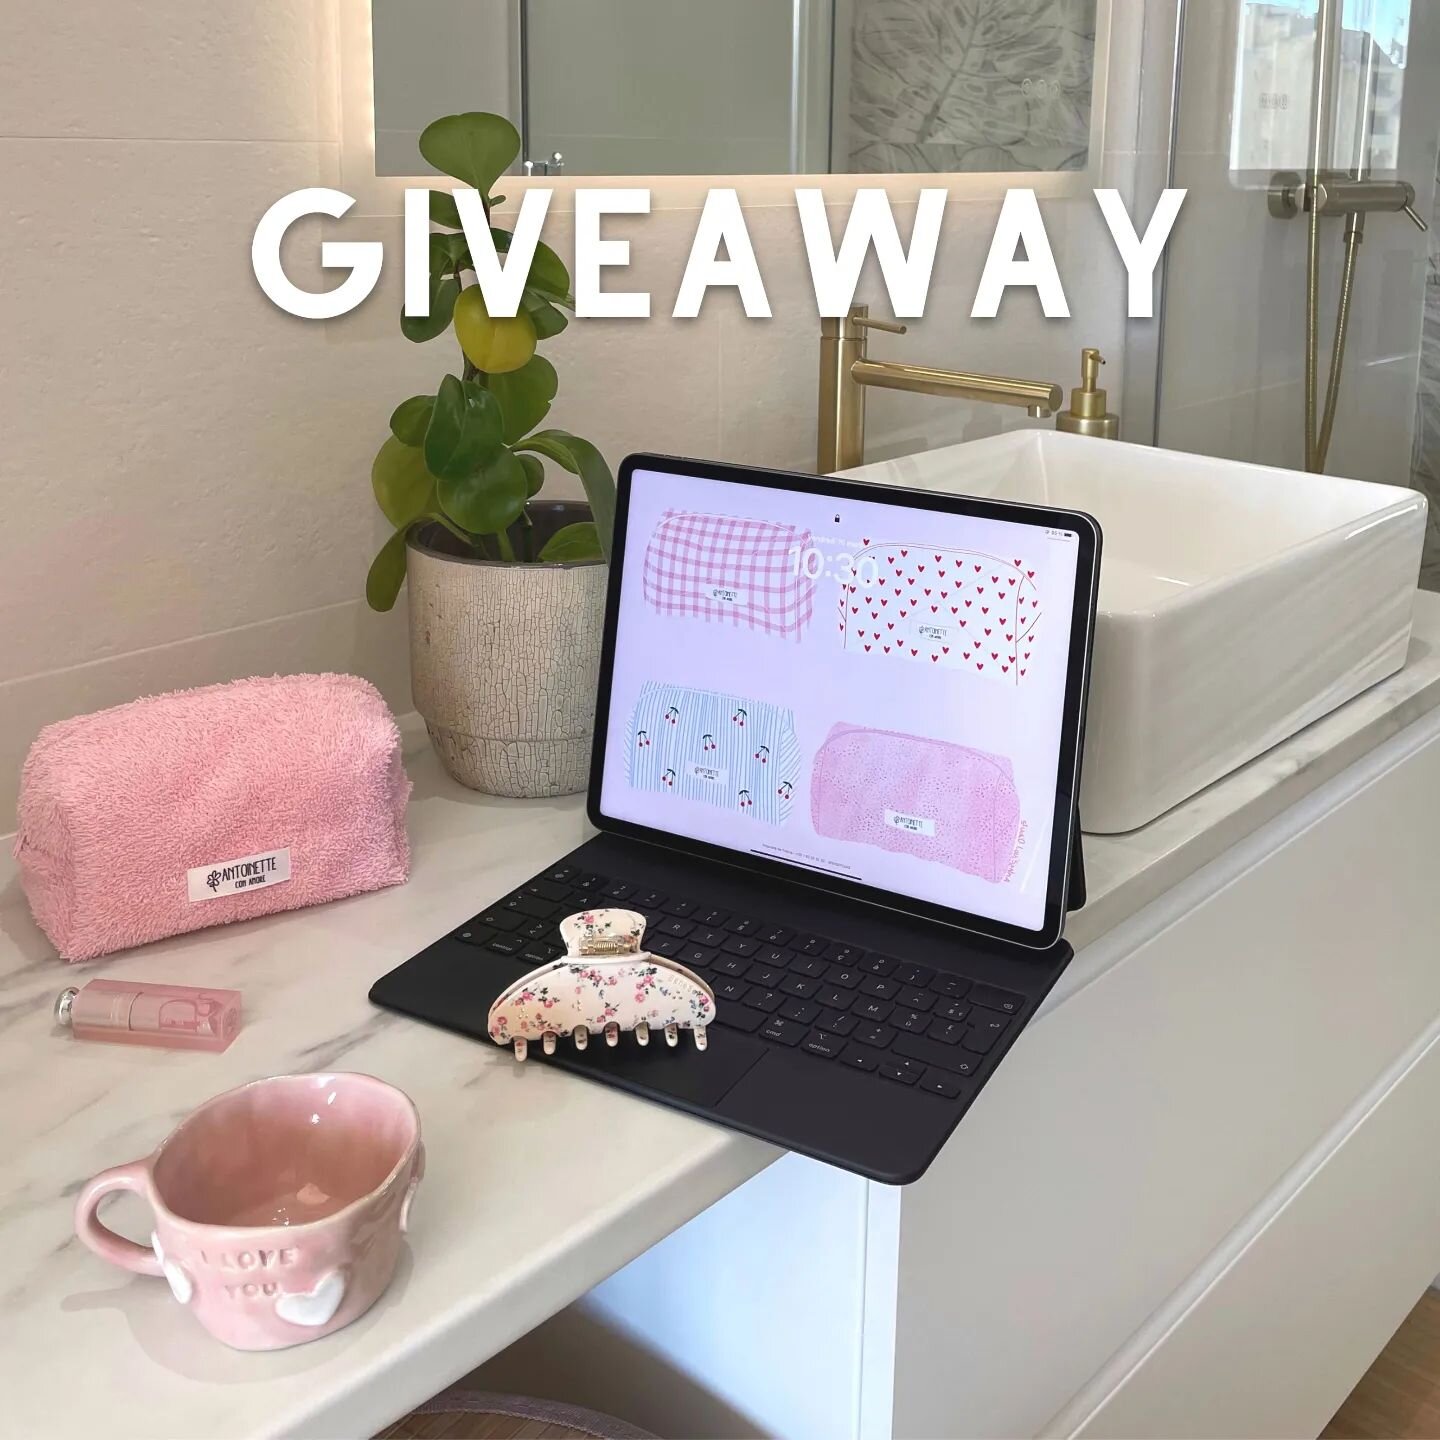 BIG GIVEAWAY 🌸  Antoinette Con Amore X B&eacute;n&eacute;Soie X Poppy Ceramics 🌸

Hello guys, we are so happy to share with you a big giveaway 💫. This is your ultimate kit for your morning skincare routine. 💕🧖&zwj;♀️

Win a lovely handmade makeu